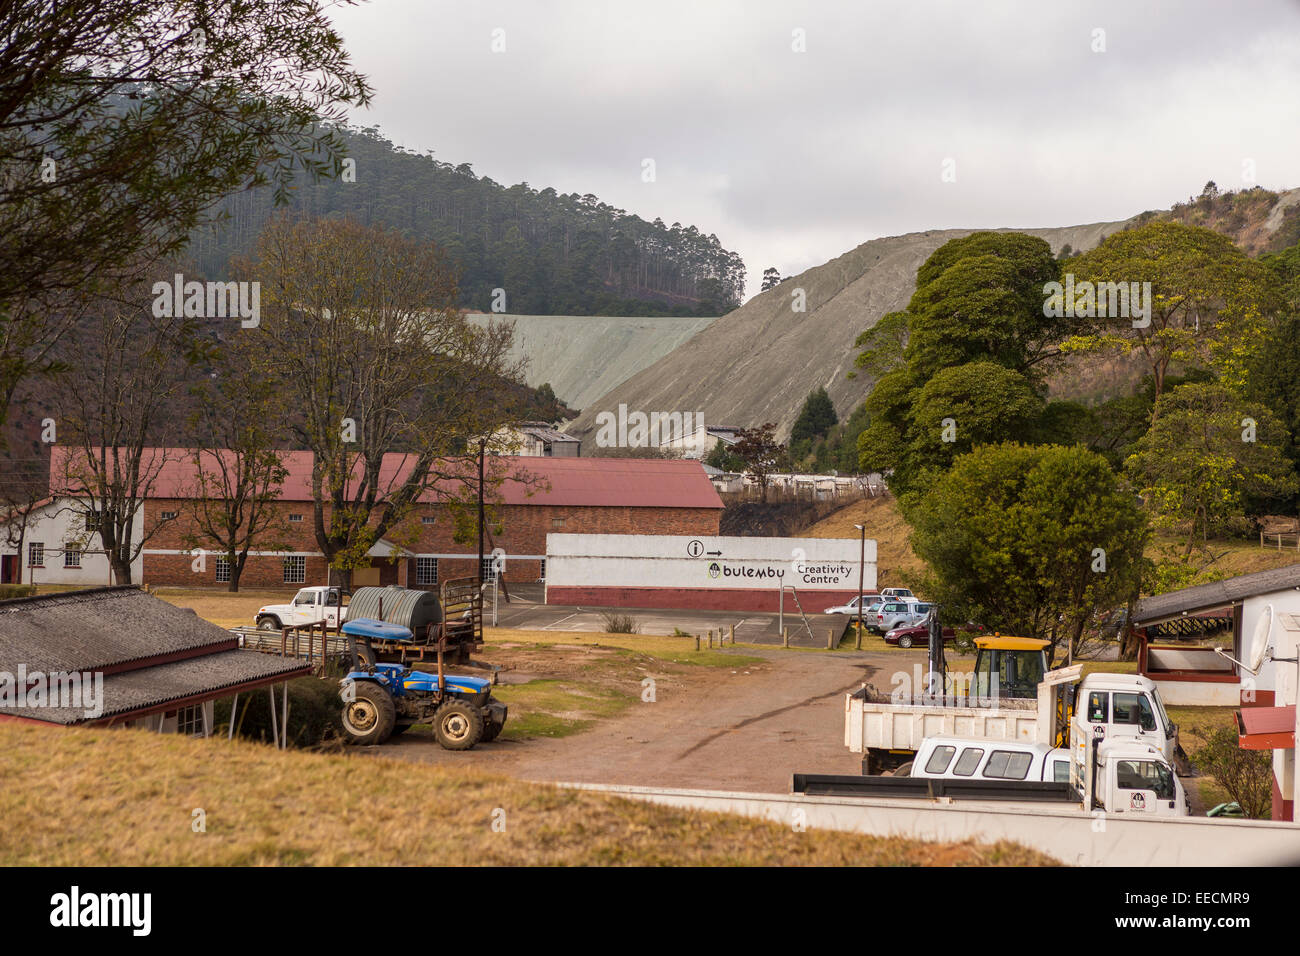 BULEMBU, SWAZILAND, AFRICA - Former asbestos mining town, now largely unoccupied, with mountain of mine tailings. Stock Photo